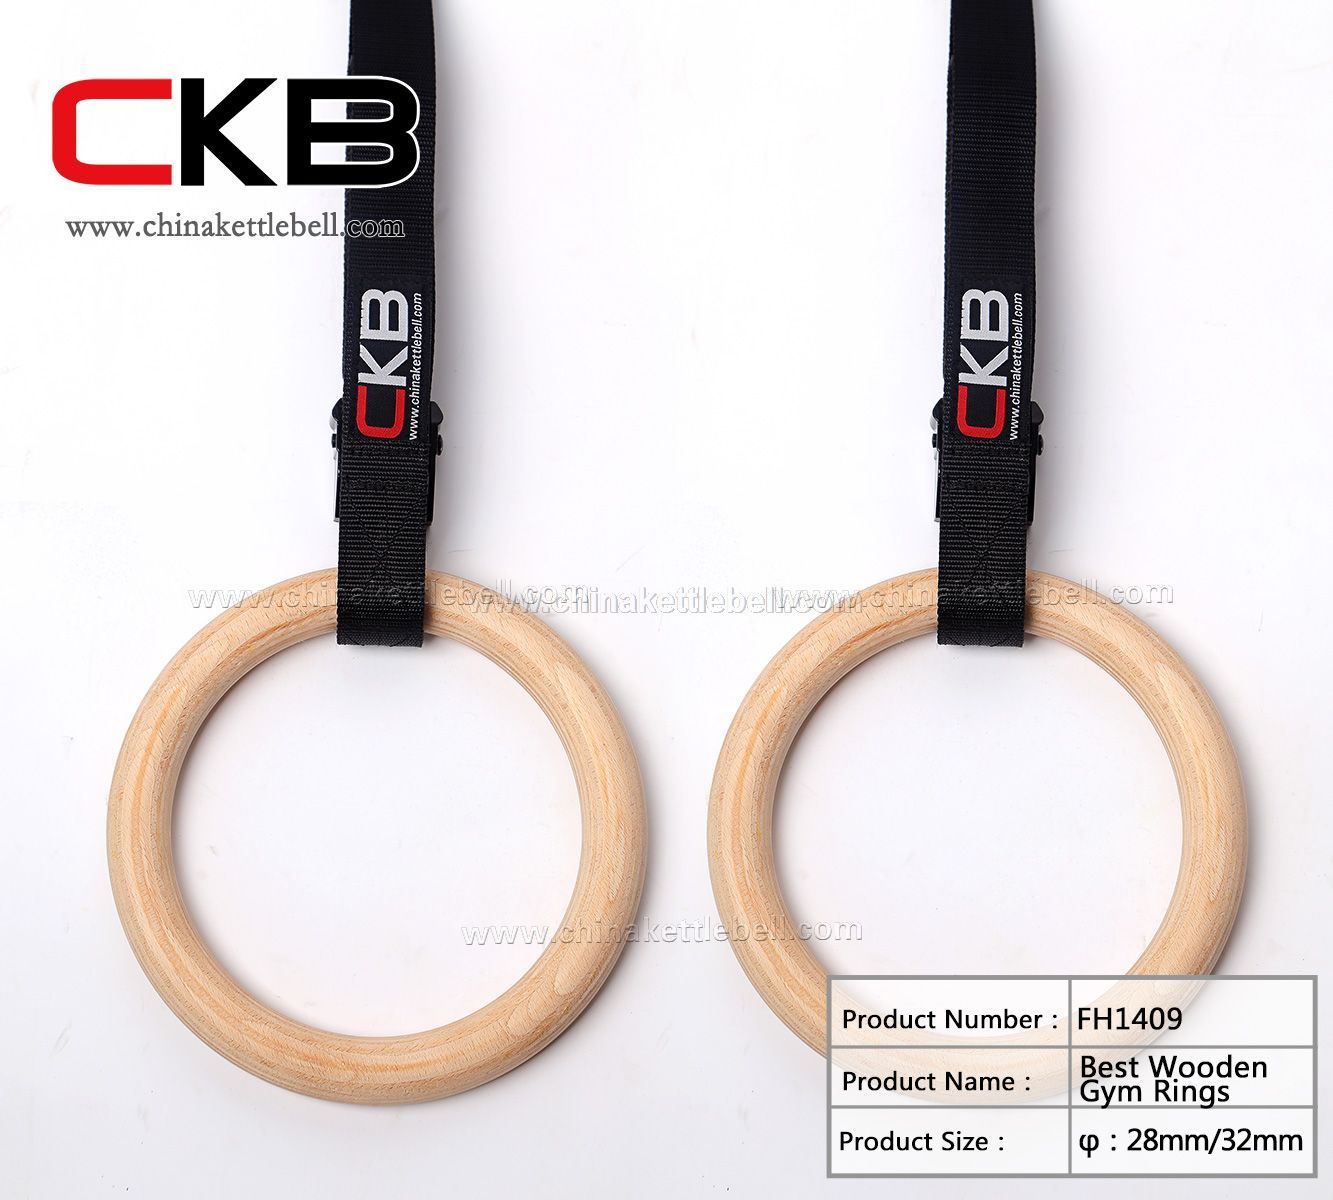 Best wooden Gym rings